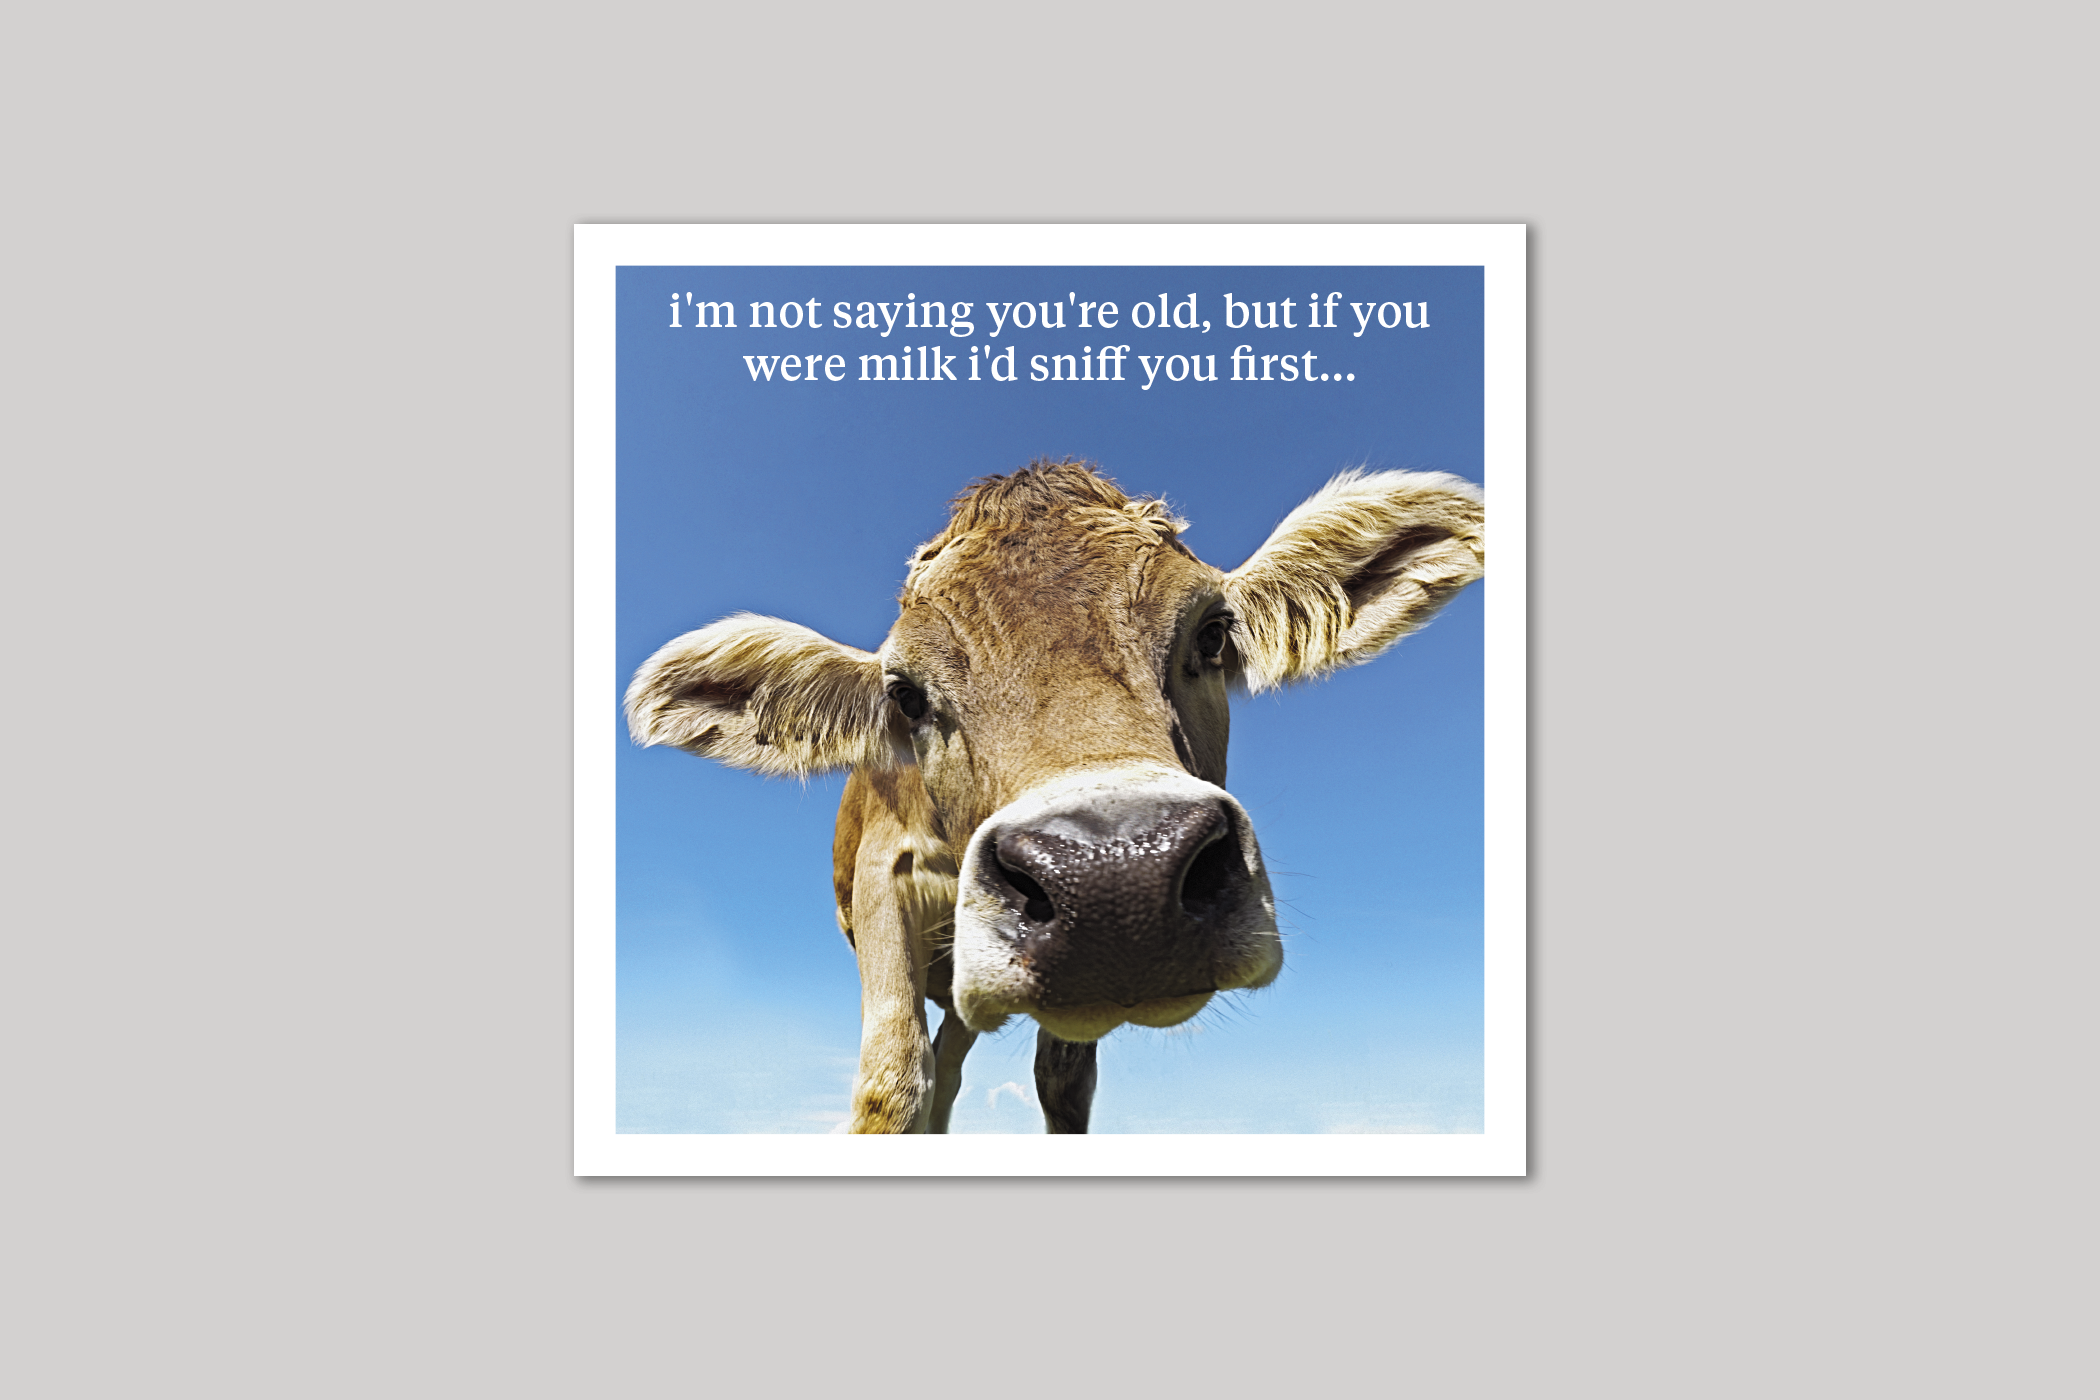 If You Were Milk quirky animal portrait from Curious World range of greeting cards by Icon.